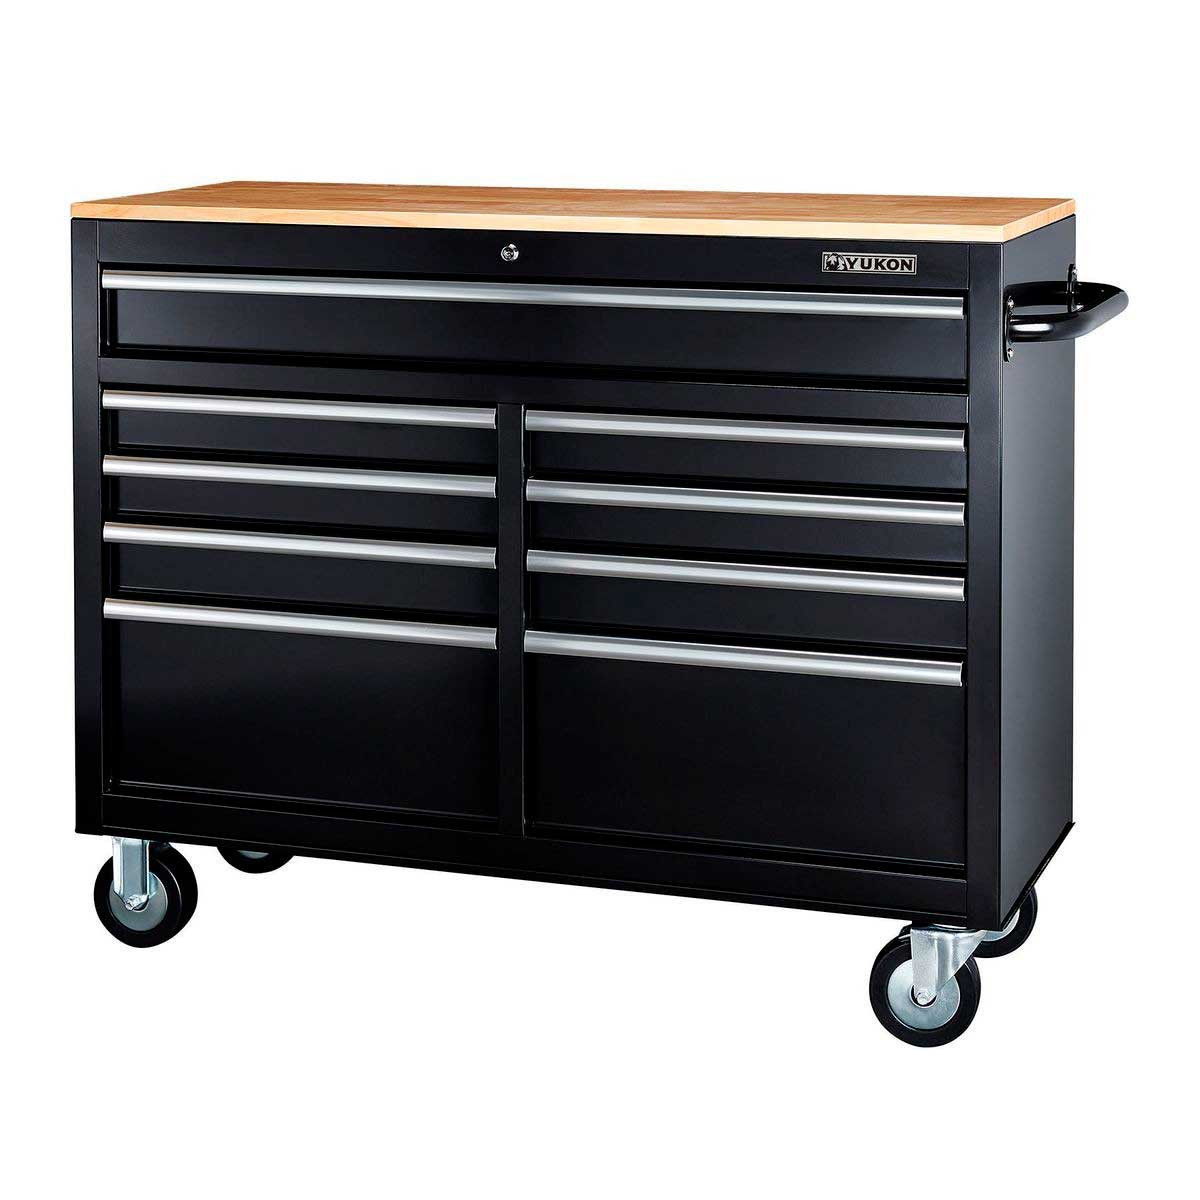 Harbor Freight Garage Organizer
 The Best New Things at Harbor Freight Right Now